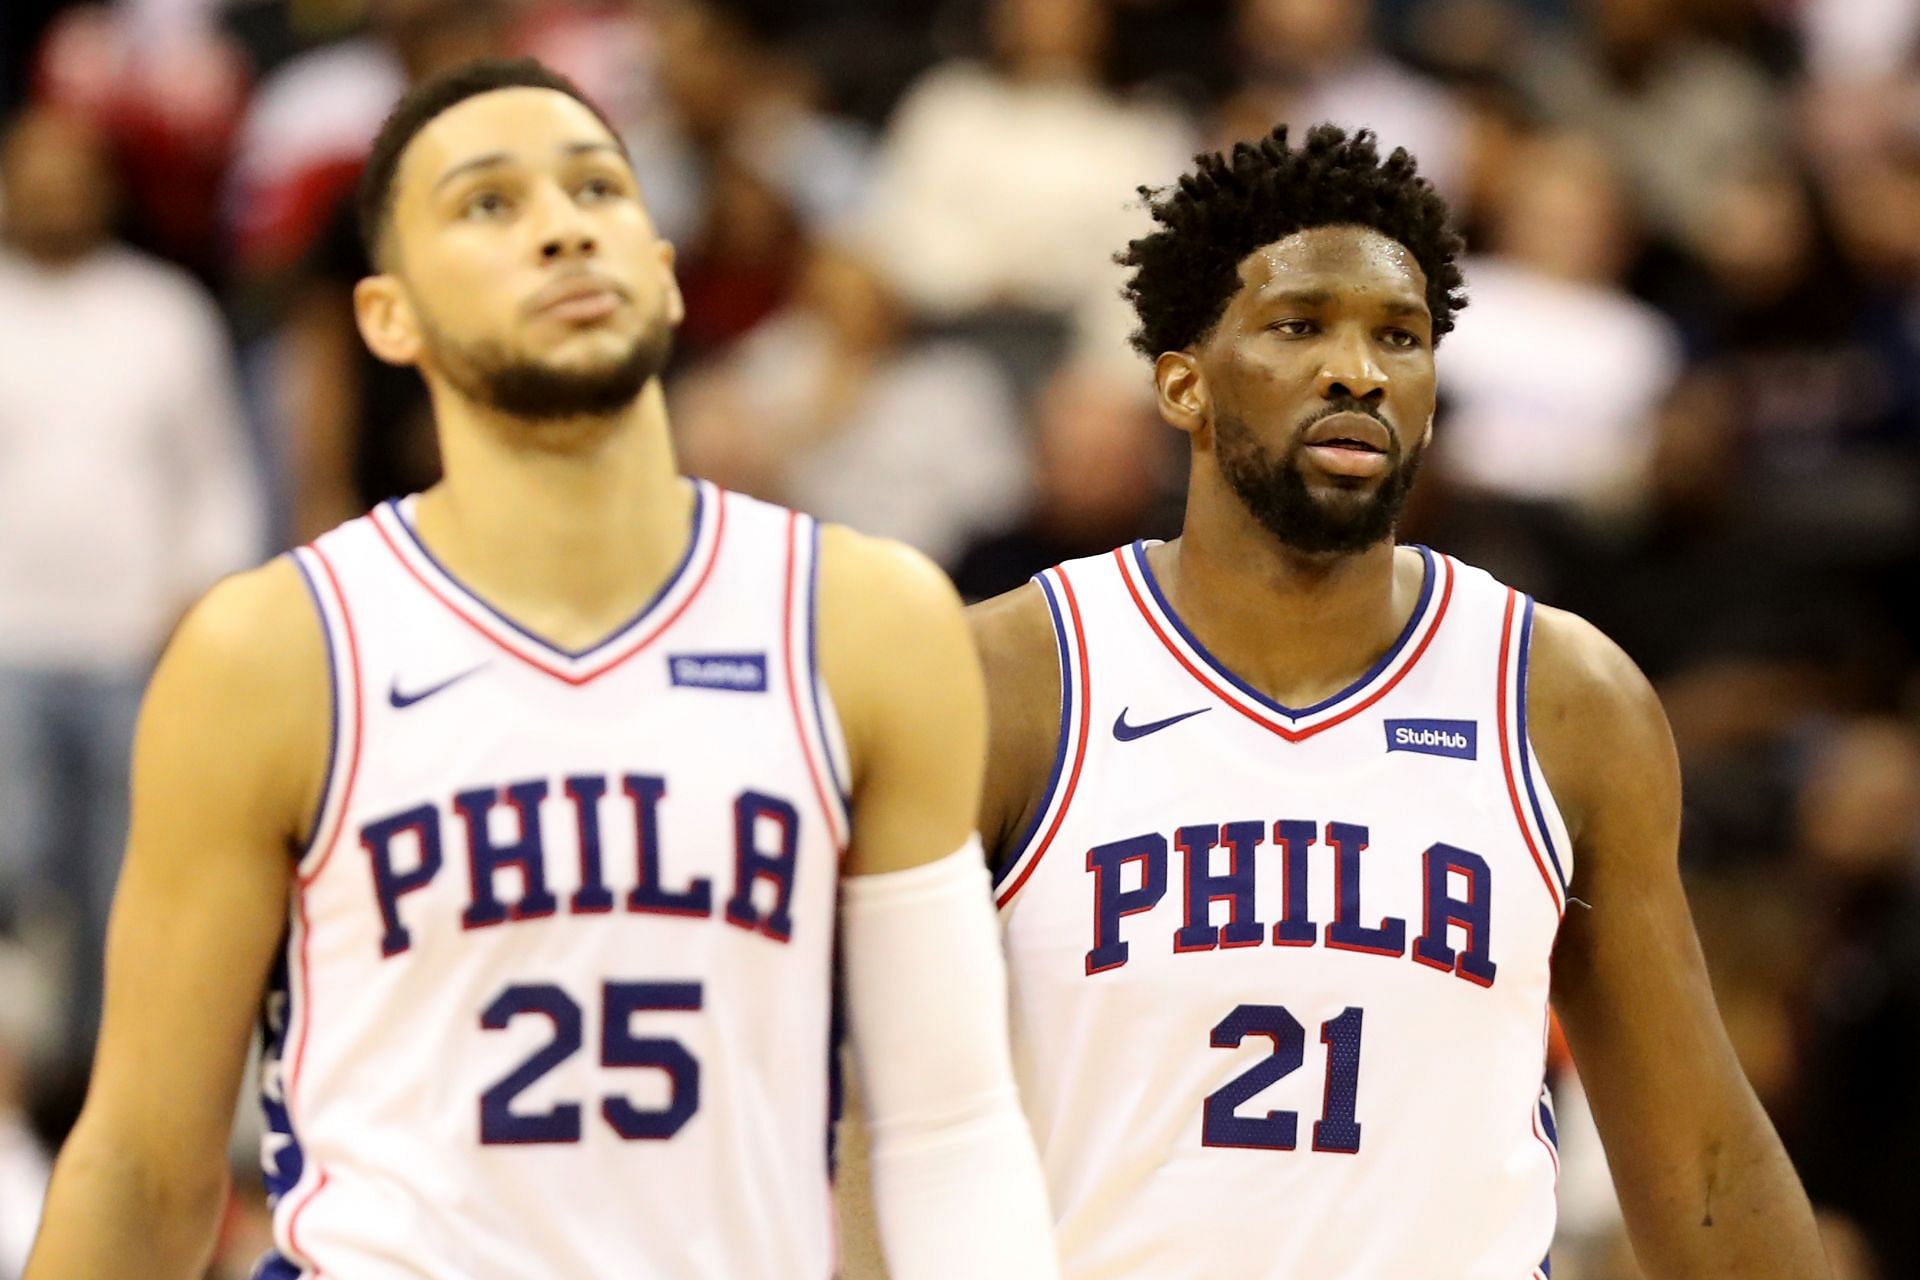 It looks as if Joel Embiid is fed up with the Ben Simmons situation in Philadelphia